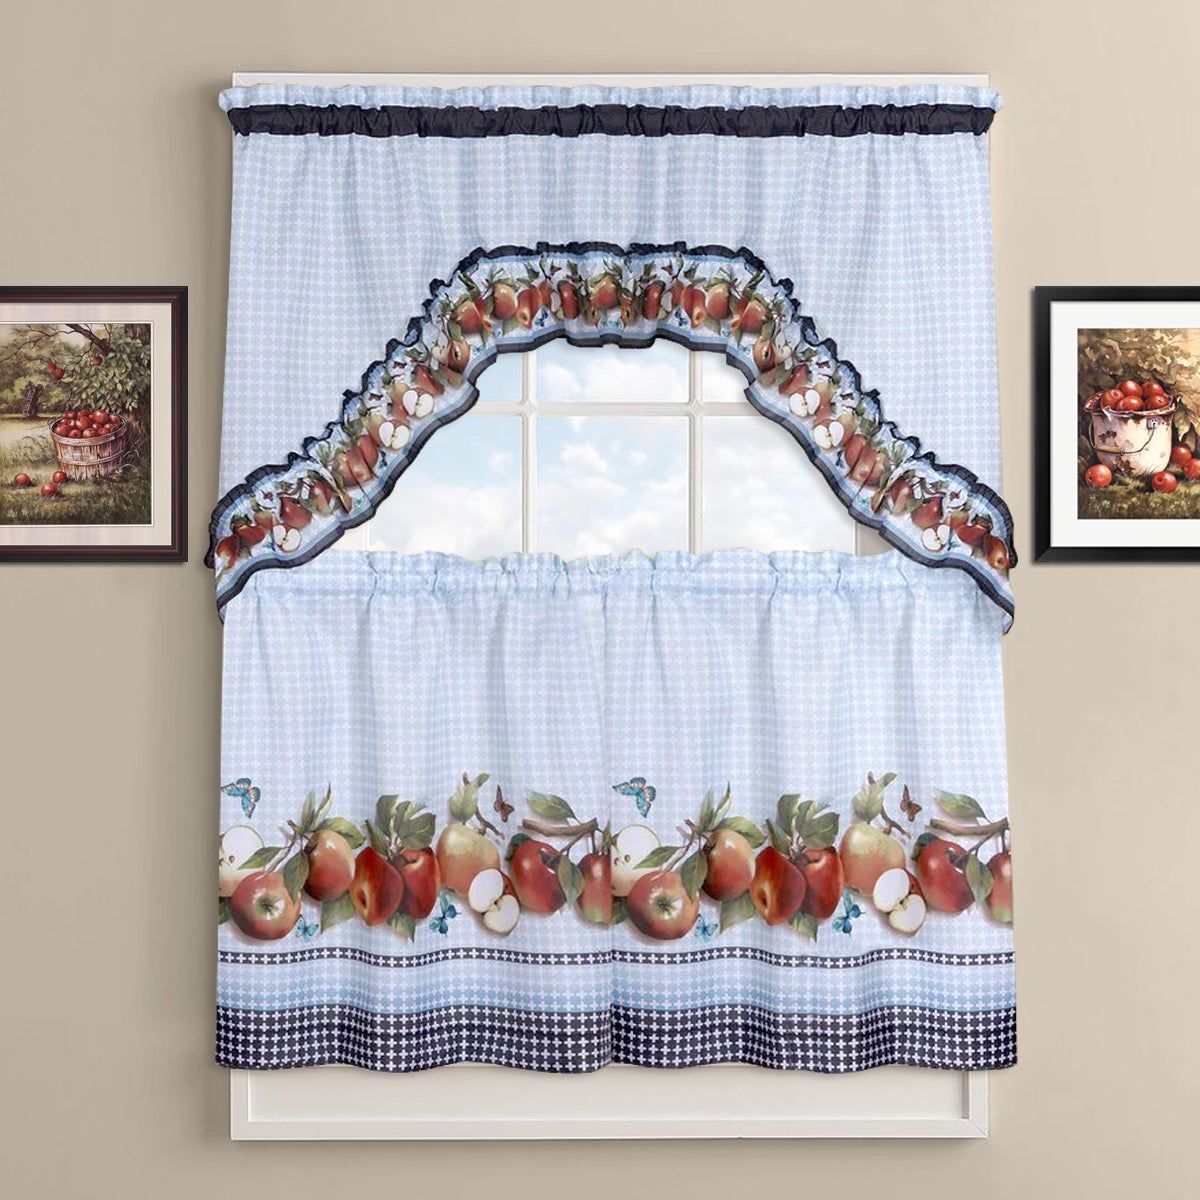 Delicious Apples Kitchen Curtain Tier And Valance Set With Red Delicious Apple 3 Piece Curtain Tiers (View 4 of 20)